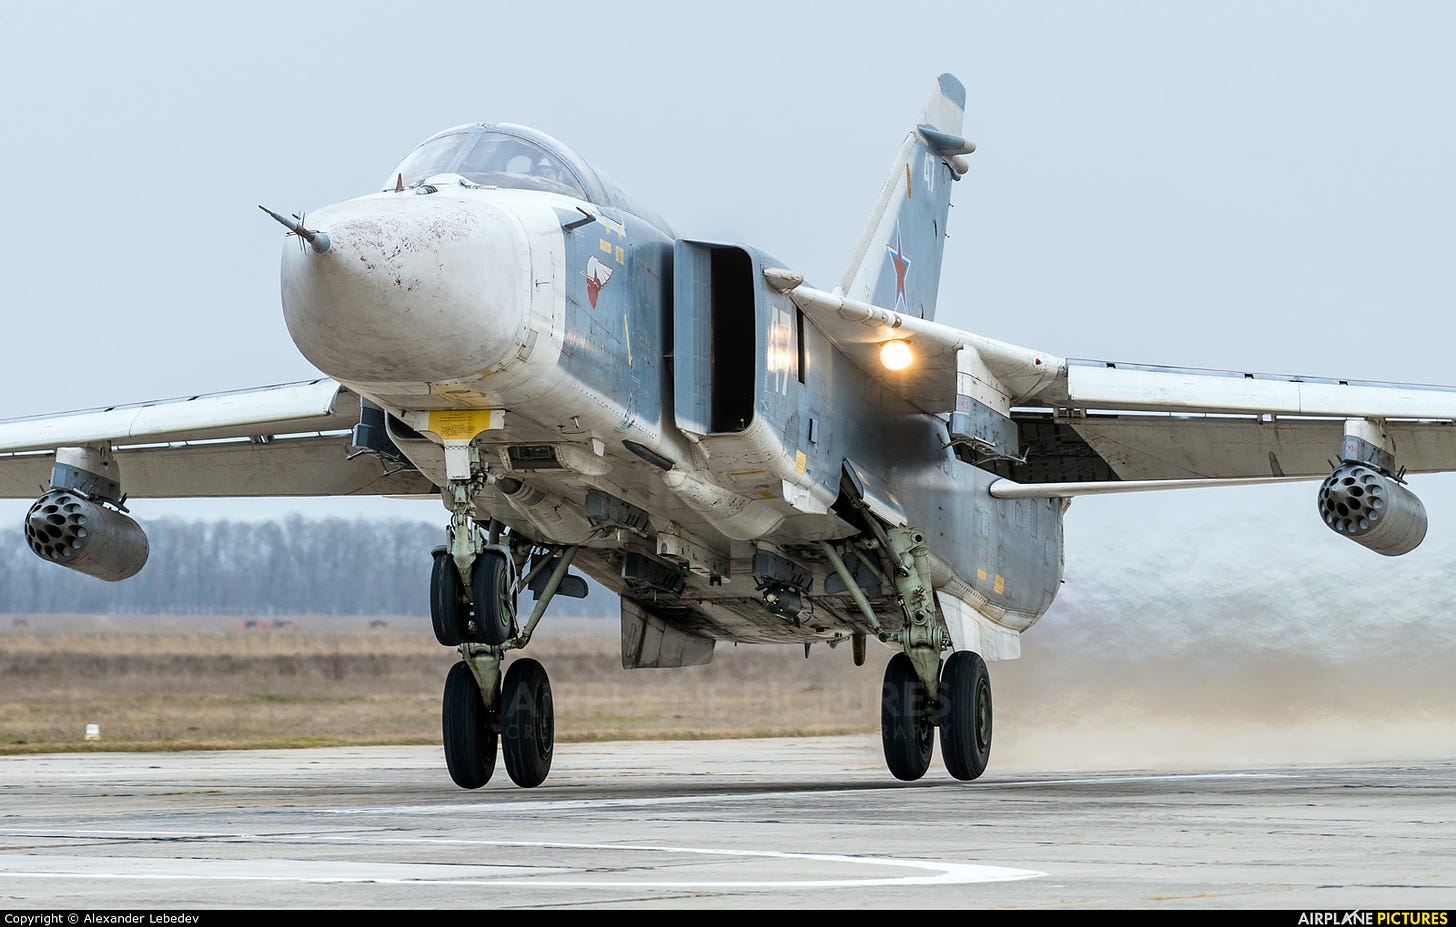 47 - Russia - Air Force Sukhoi SU-24 at Undisclosed location | Photo ID  1047849 | Airplane-Pictures.net